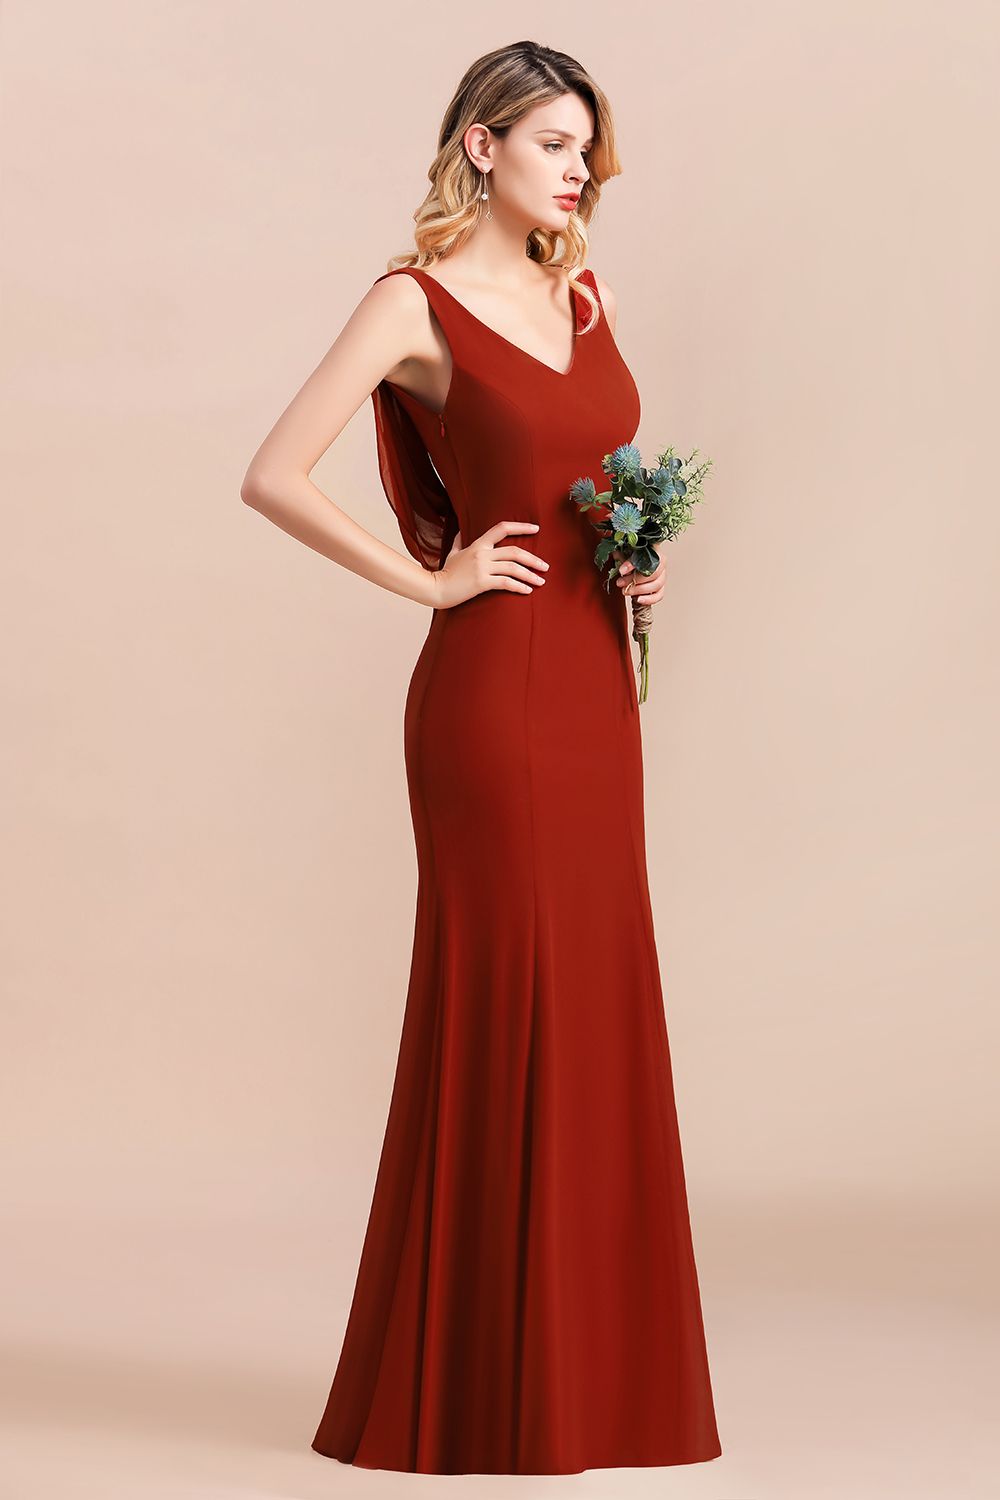 Load image into Gallery viewer, Charming Mermaid V-Neck Drapped Back Bridesmaid Dress Online-27dress
